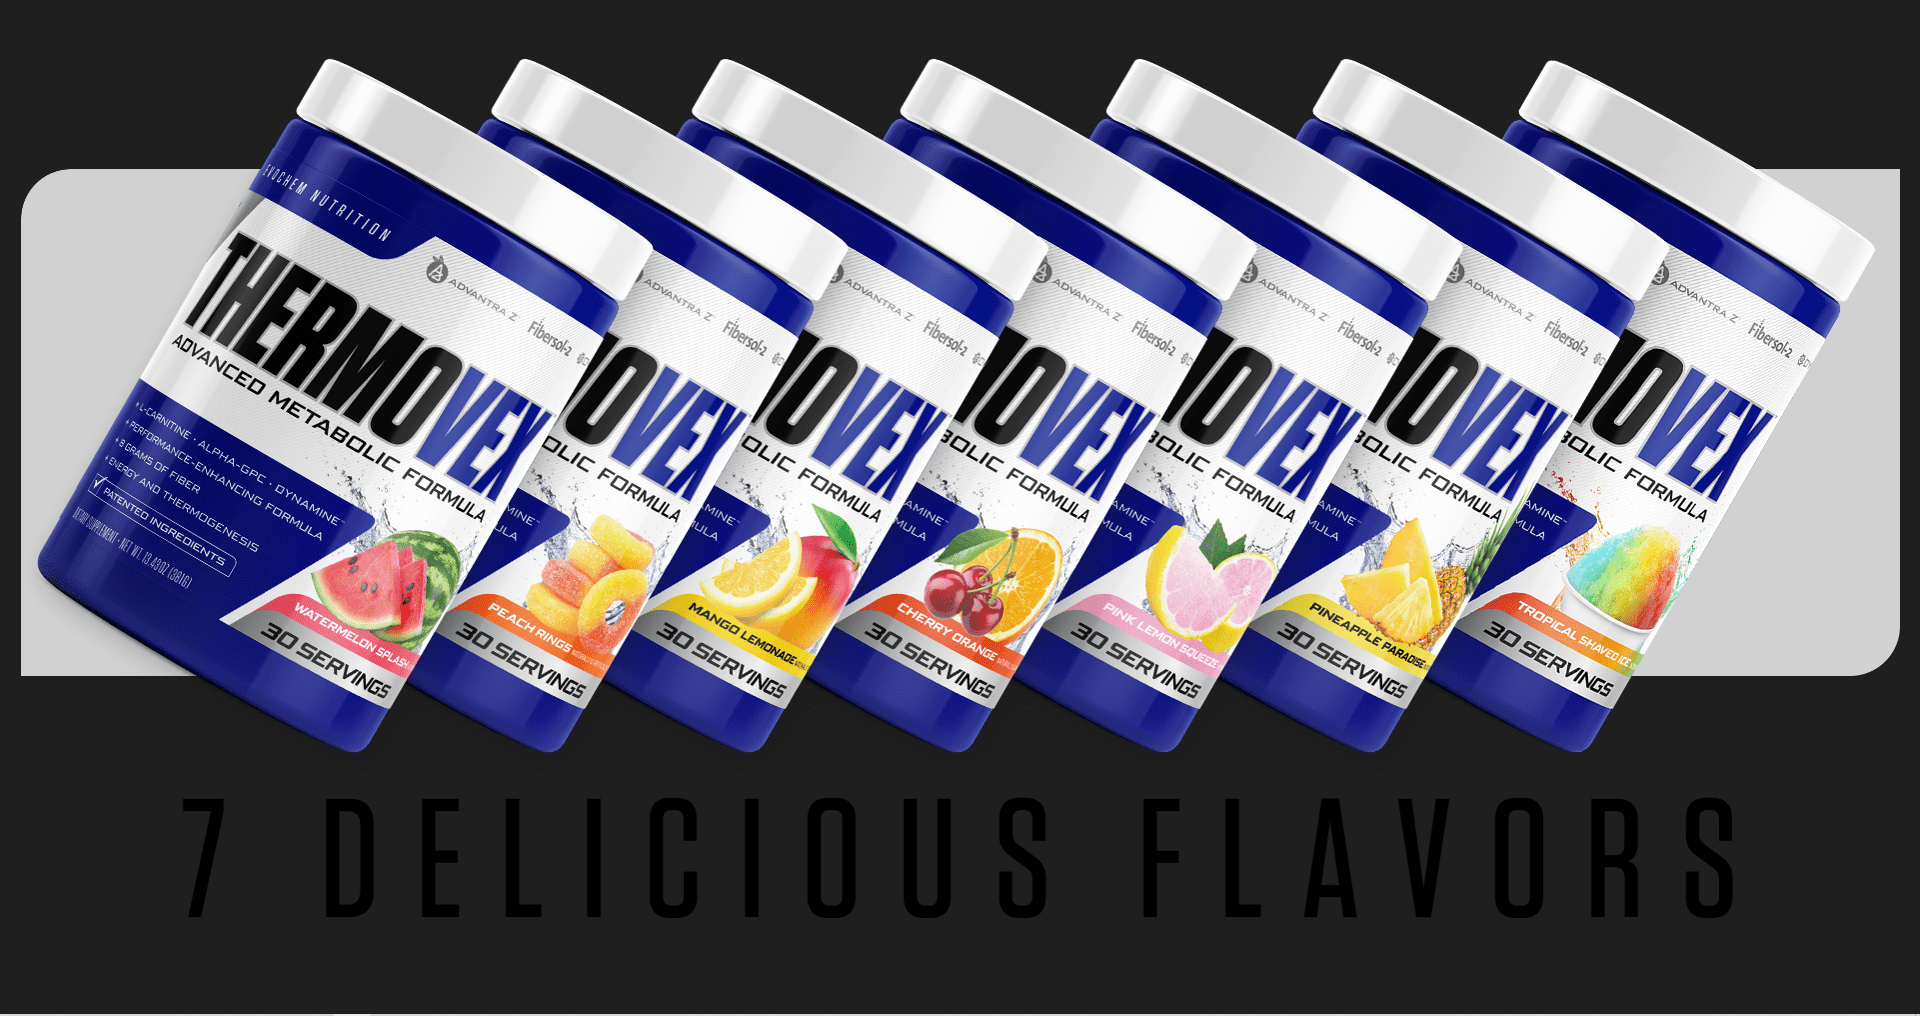 Thermovex Product Flavors